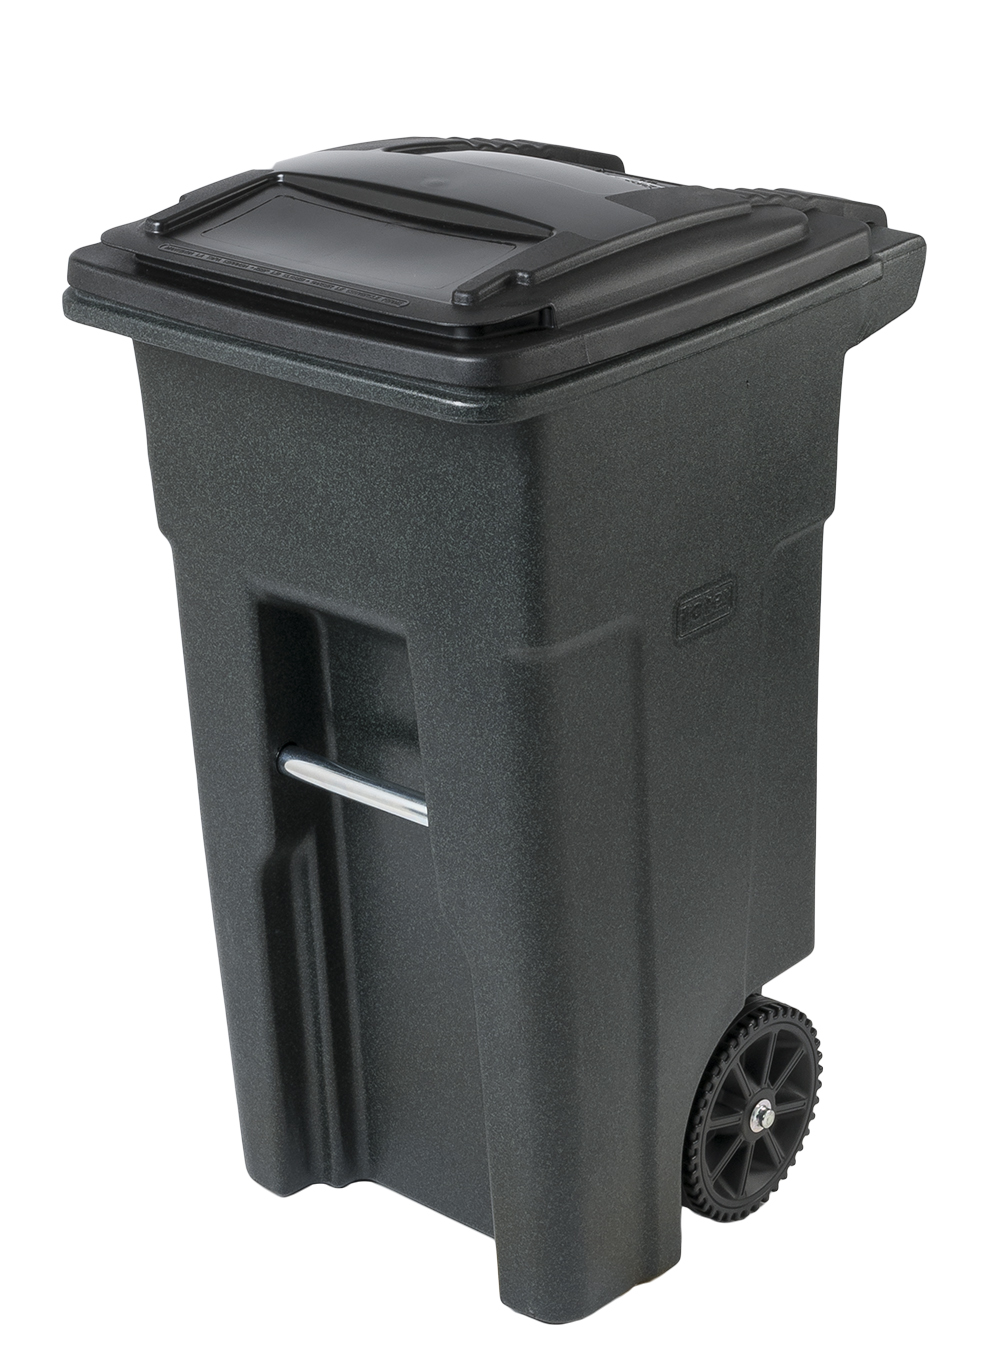 https://www.toter.com/sites/default/files/2021-05/Toter_32Gallon_TwoWheelCan_Greenstone_25532_Main.png